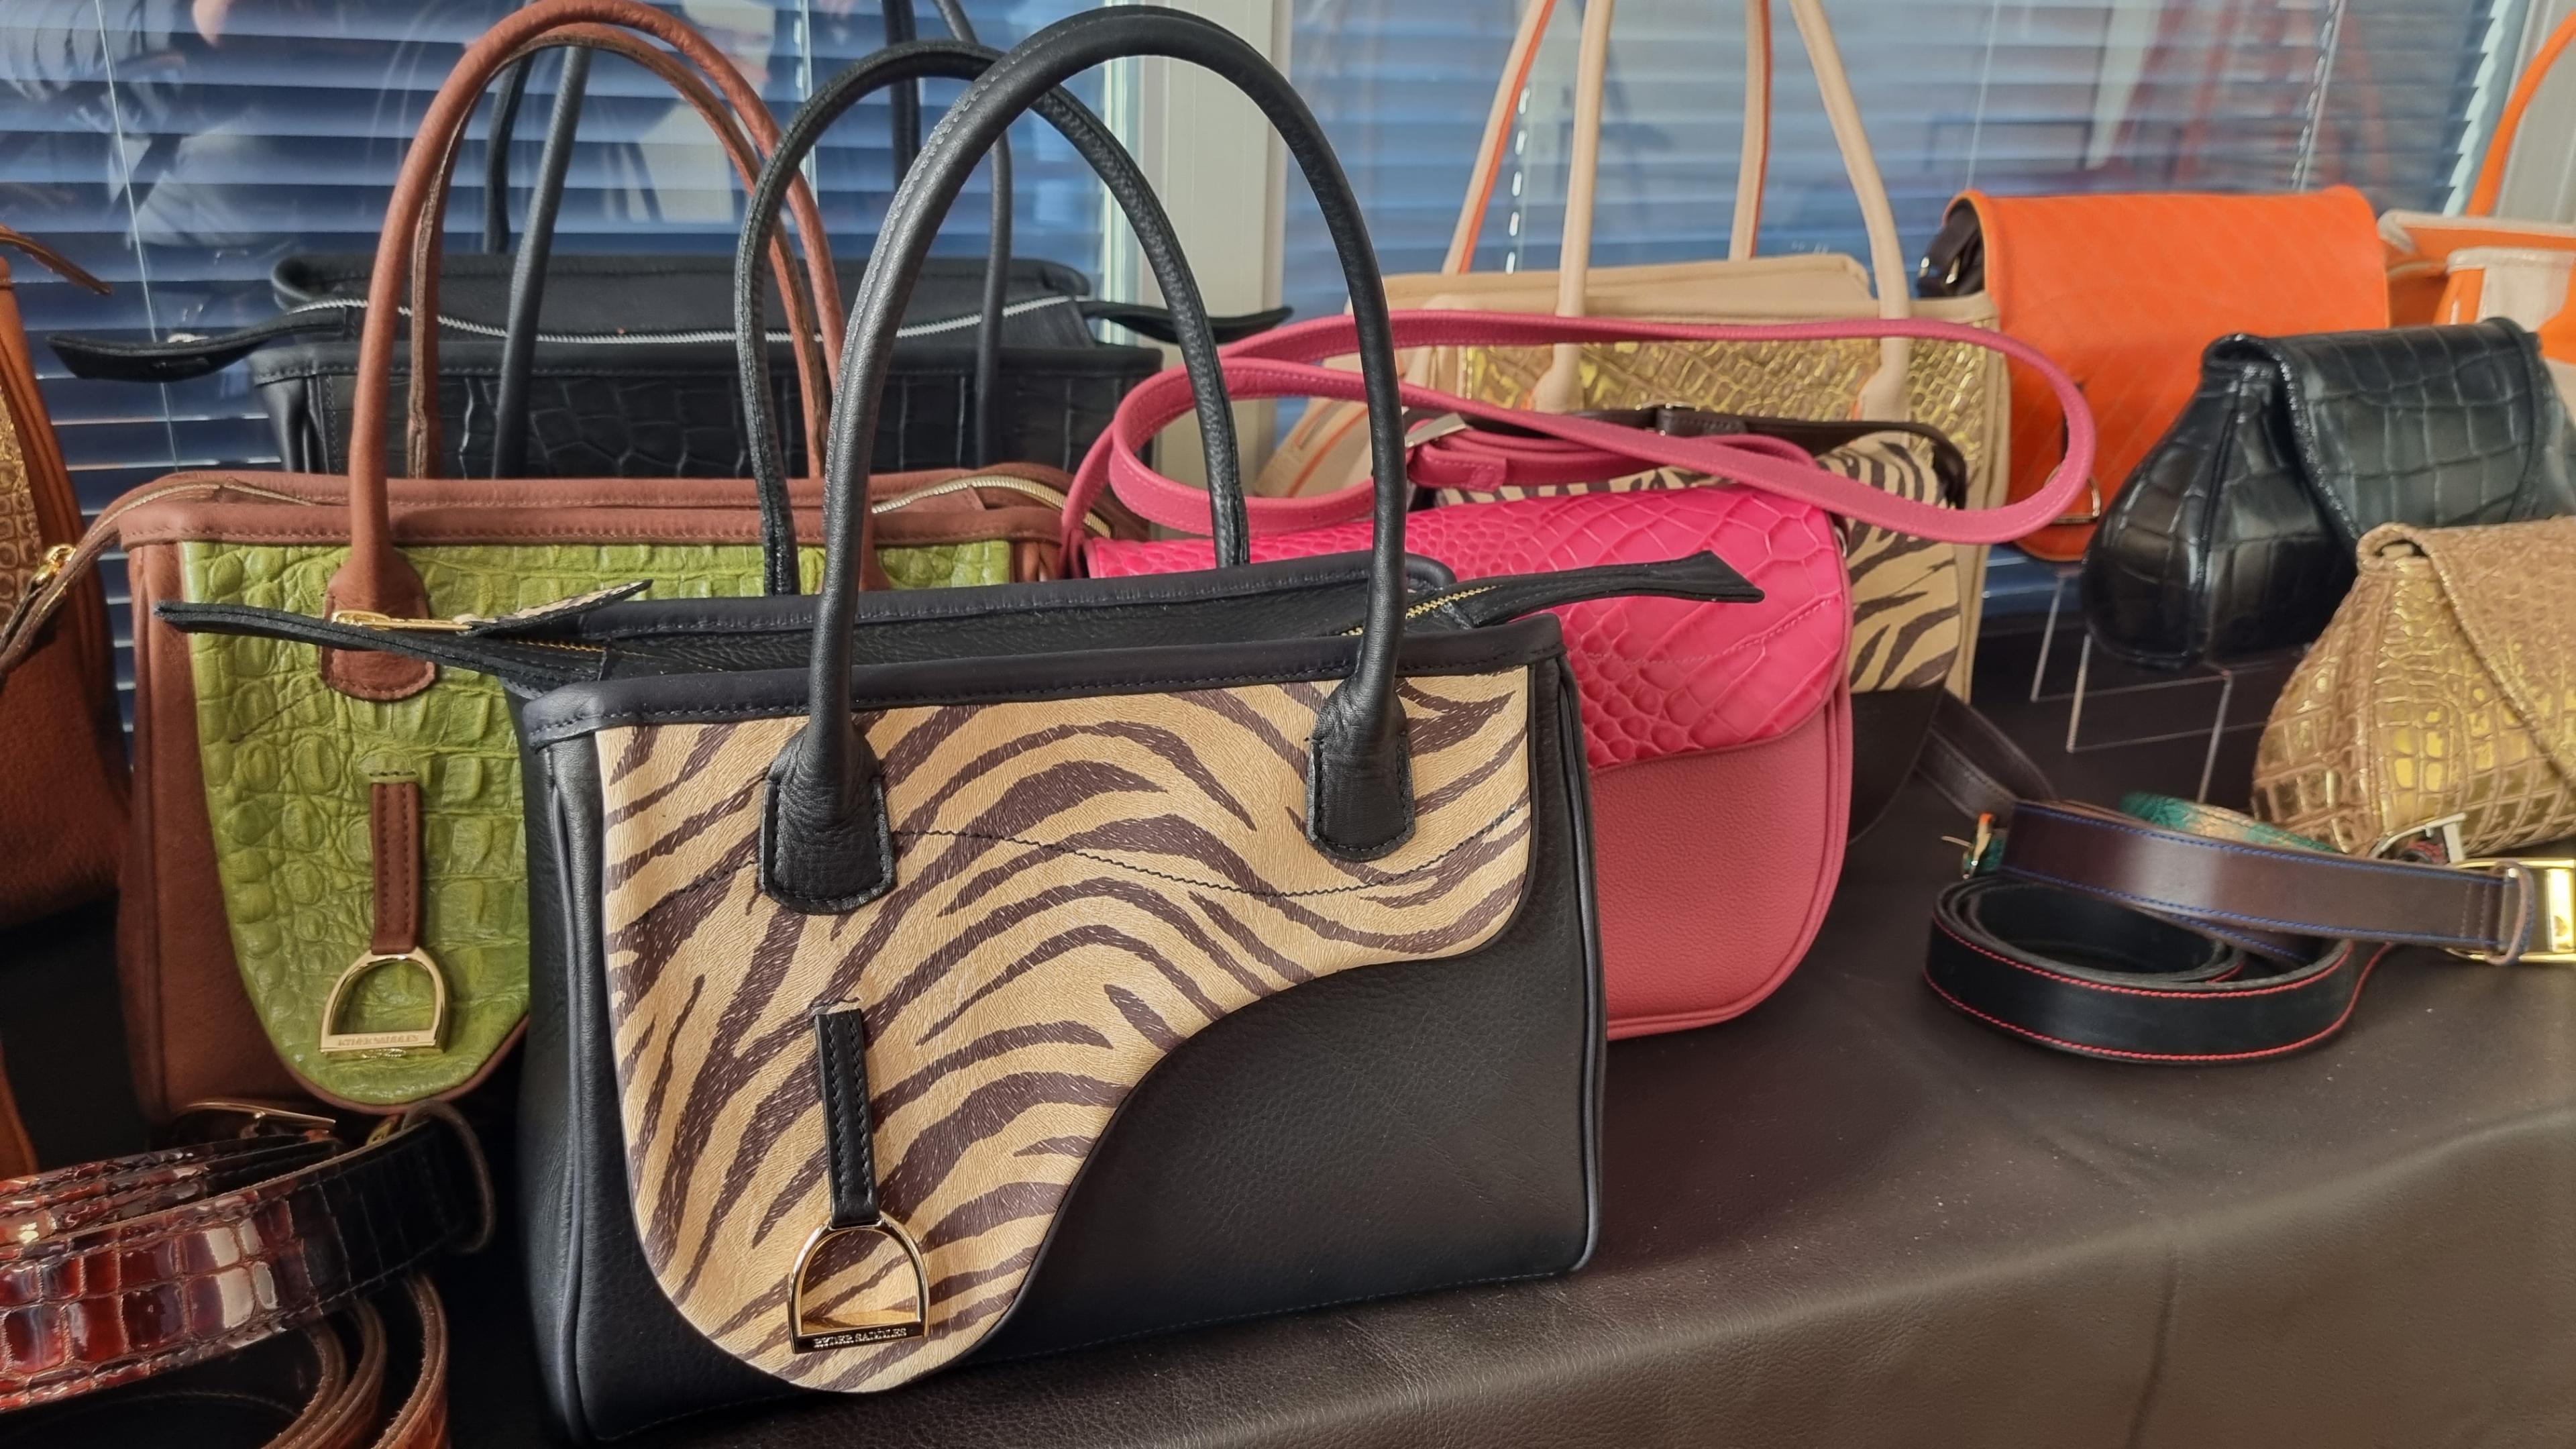 A table full of leather handbags in various colours. In front is a black bag with a zebra print top, behind it is a bright pink bag